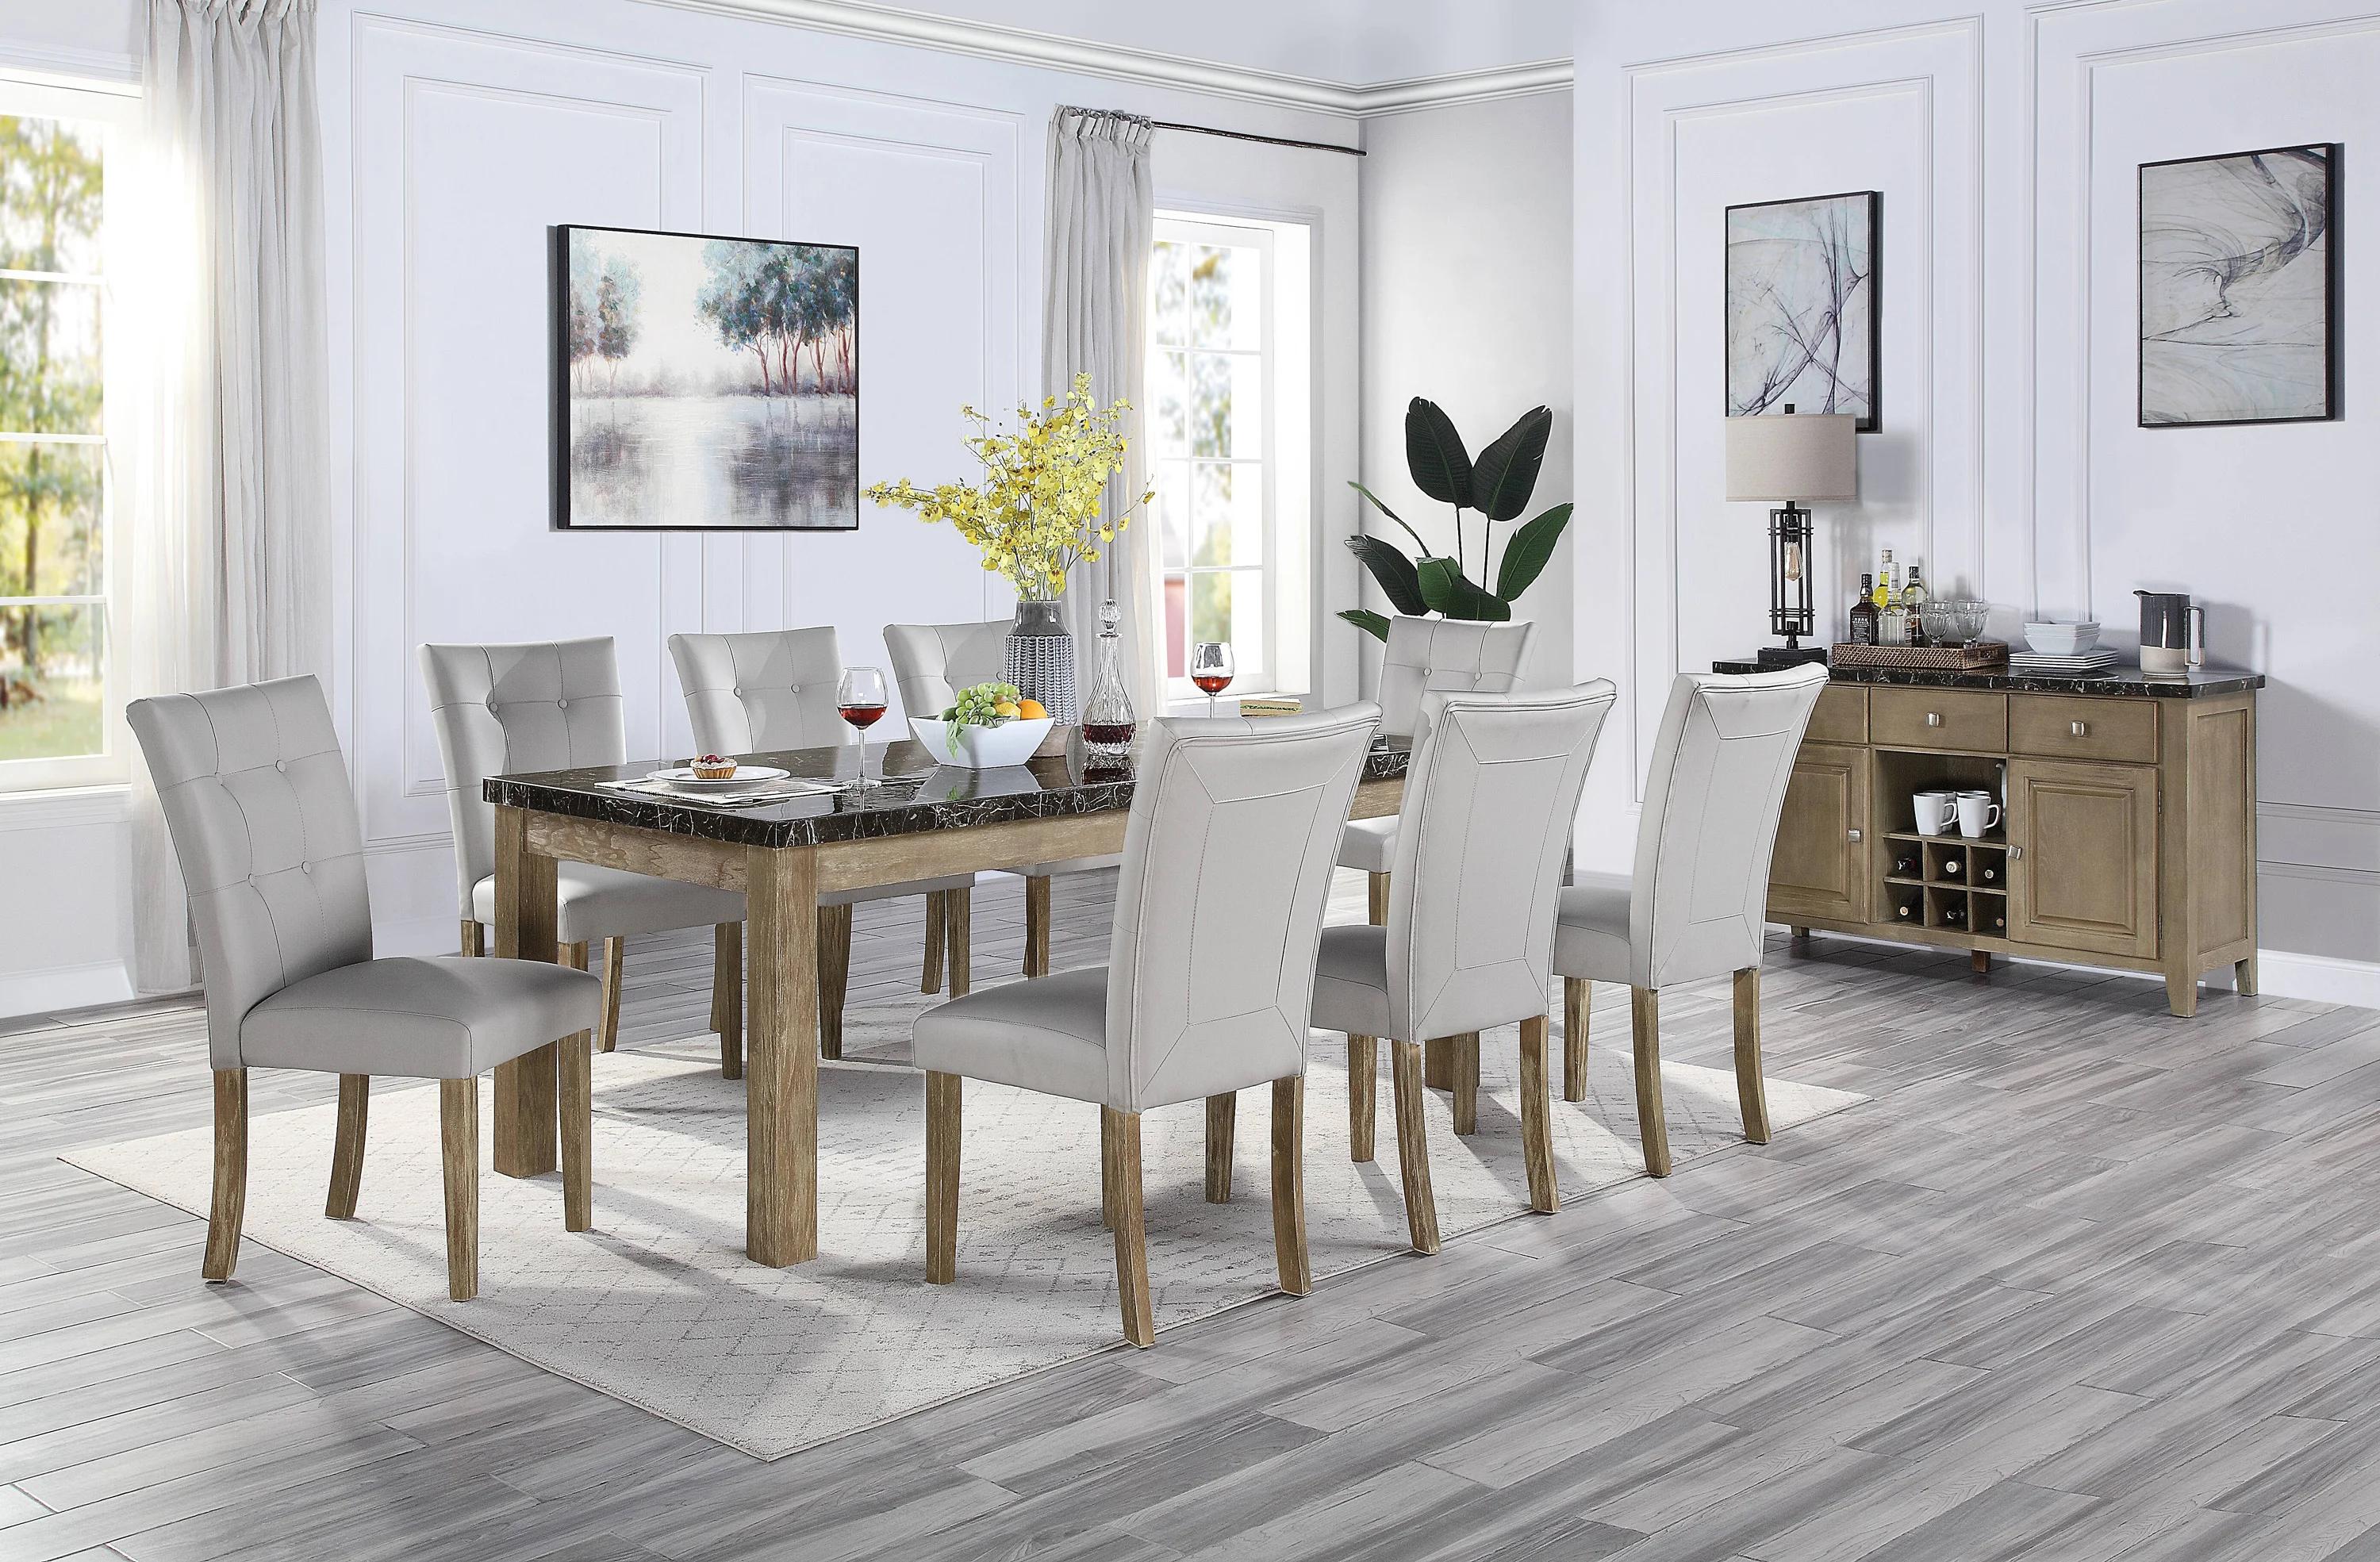 Transitional Dining Room Set Charnell DN00553-10pcs in Oak PU